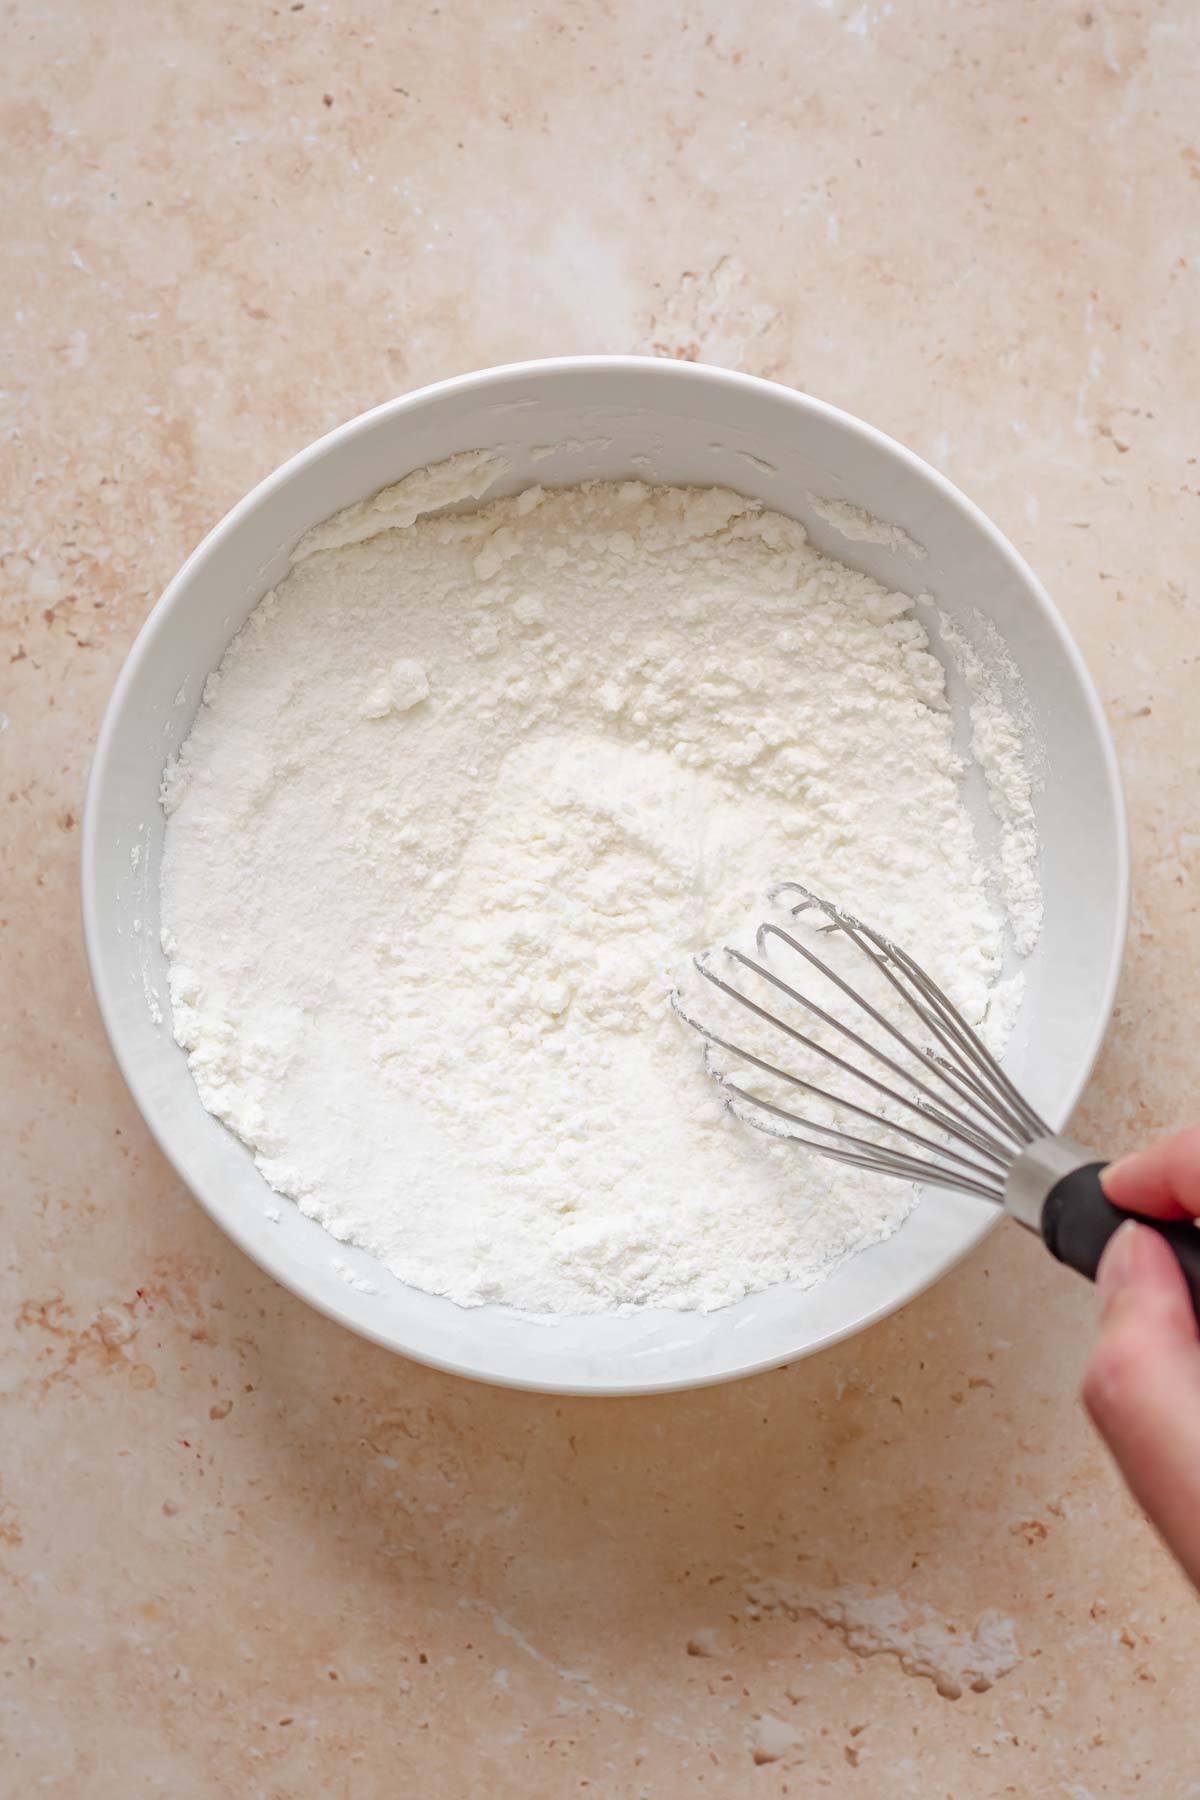 A hand whisks together sugar and cornstarch in a bowl.